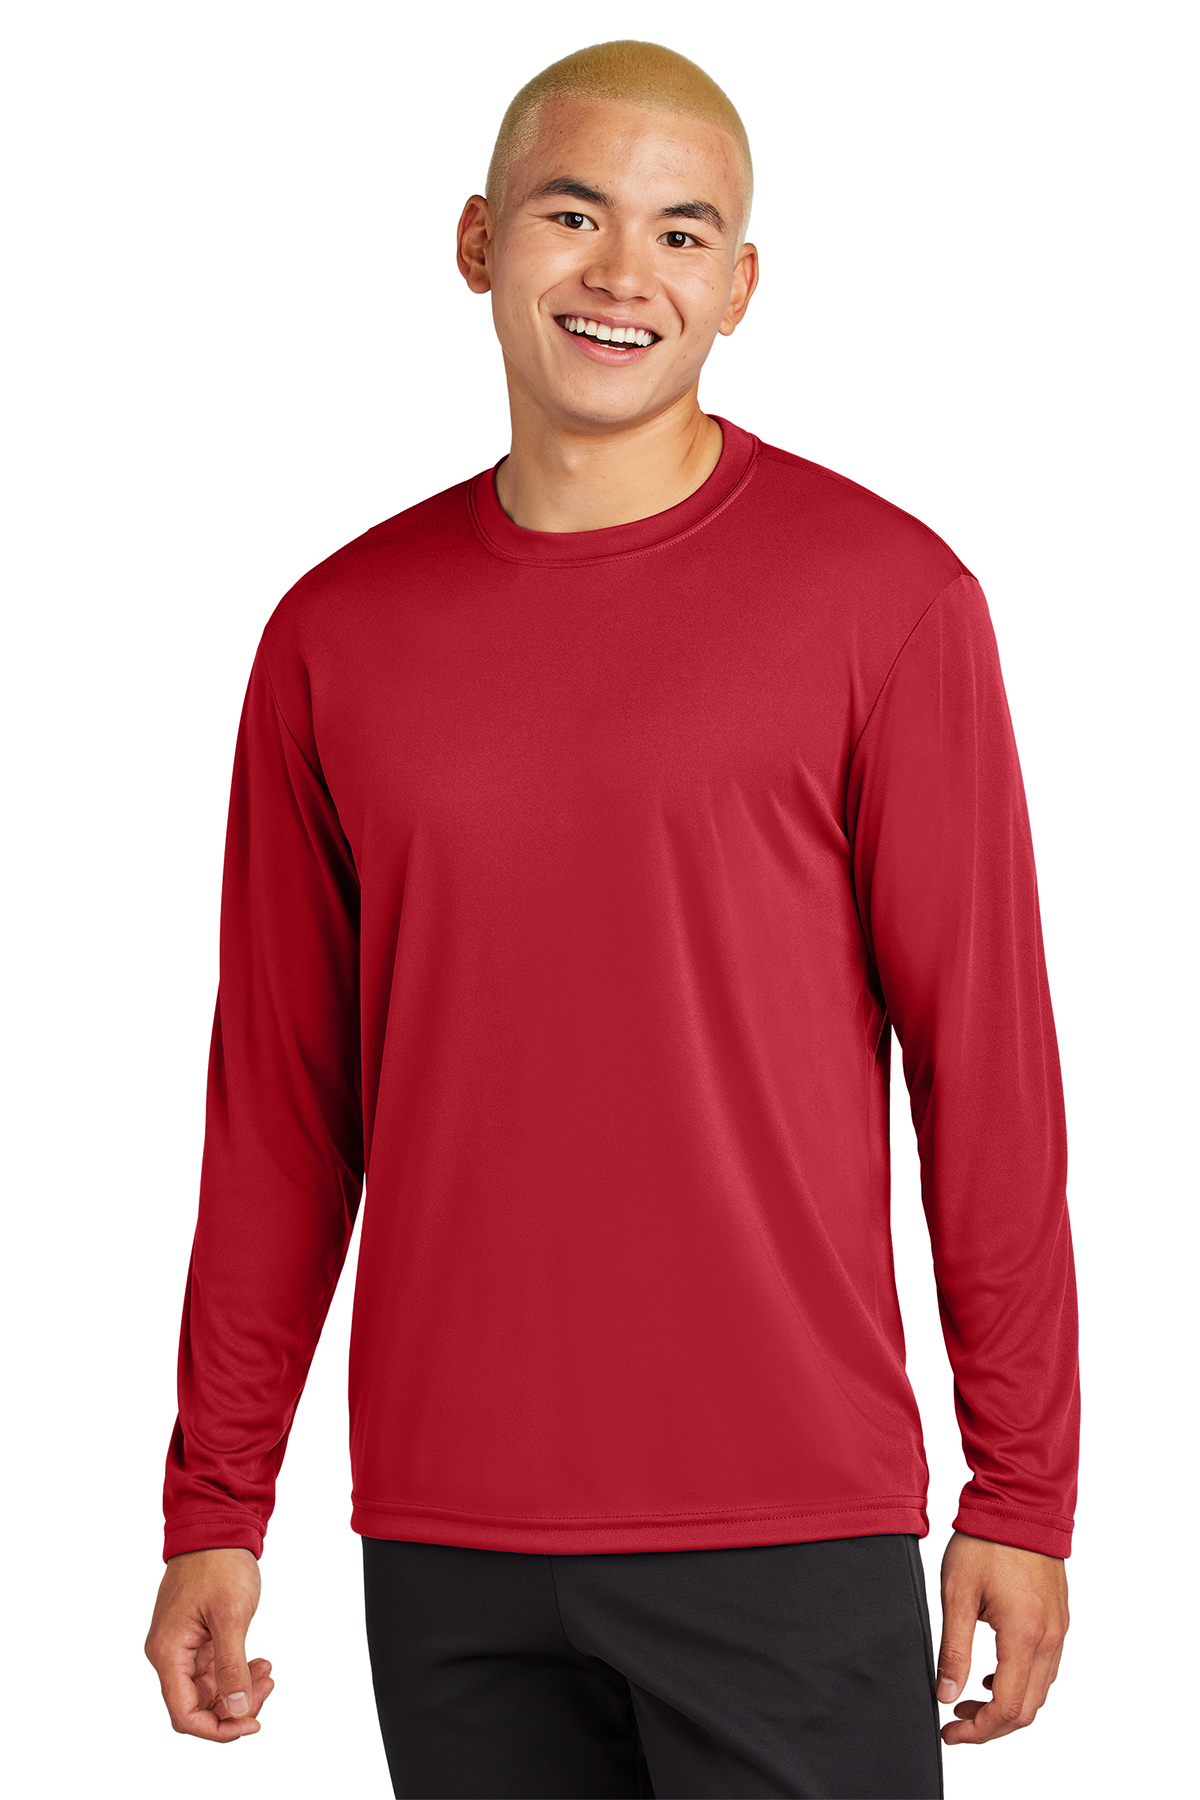 Long Sleeve Sports Tee Shirts Fishing T-Shirt Pullover Breathable